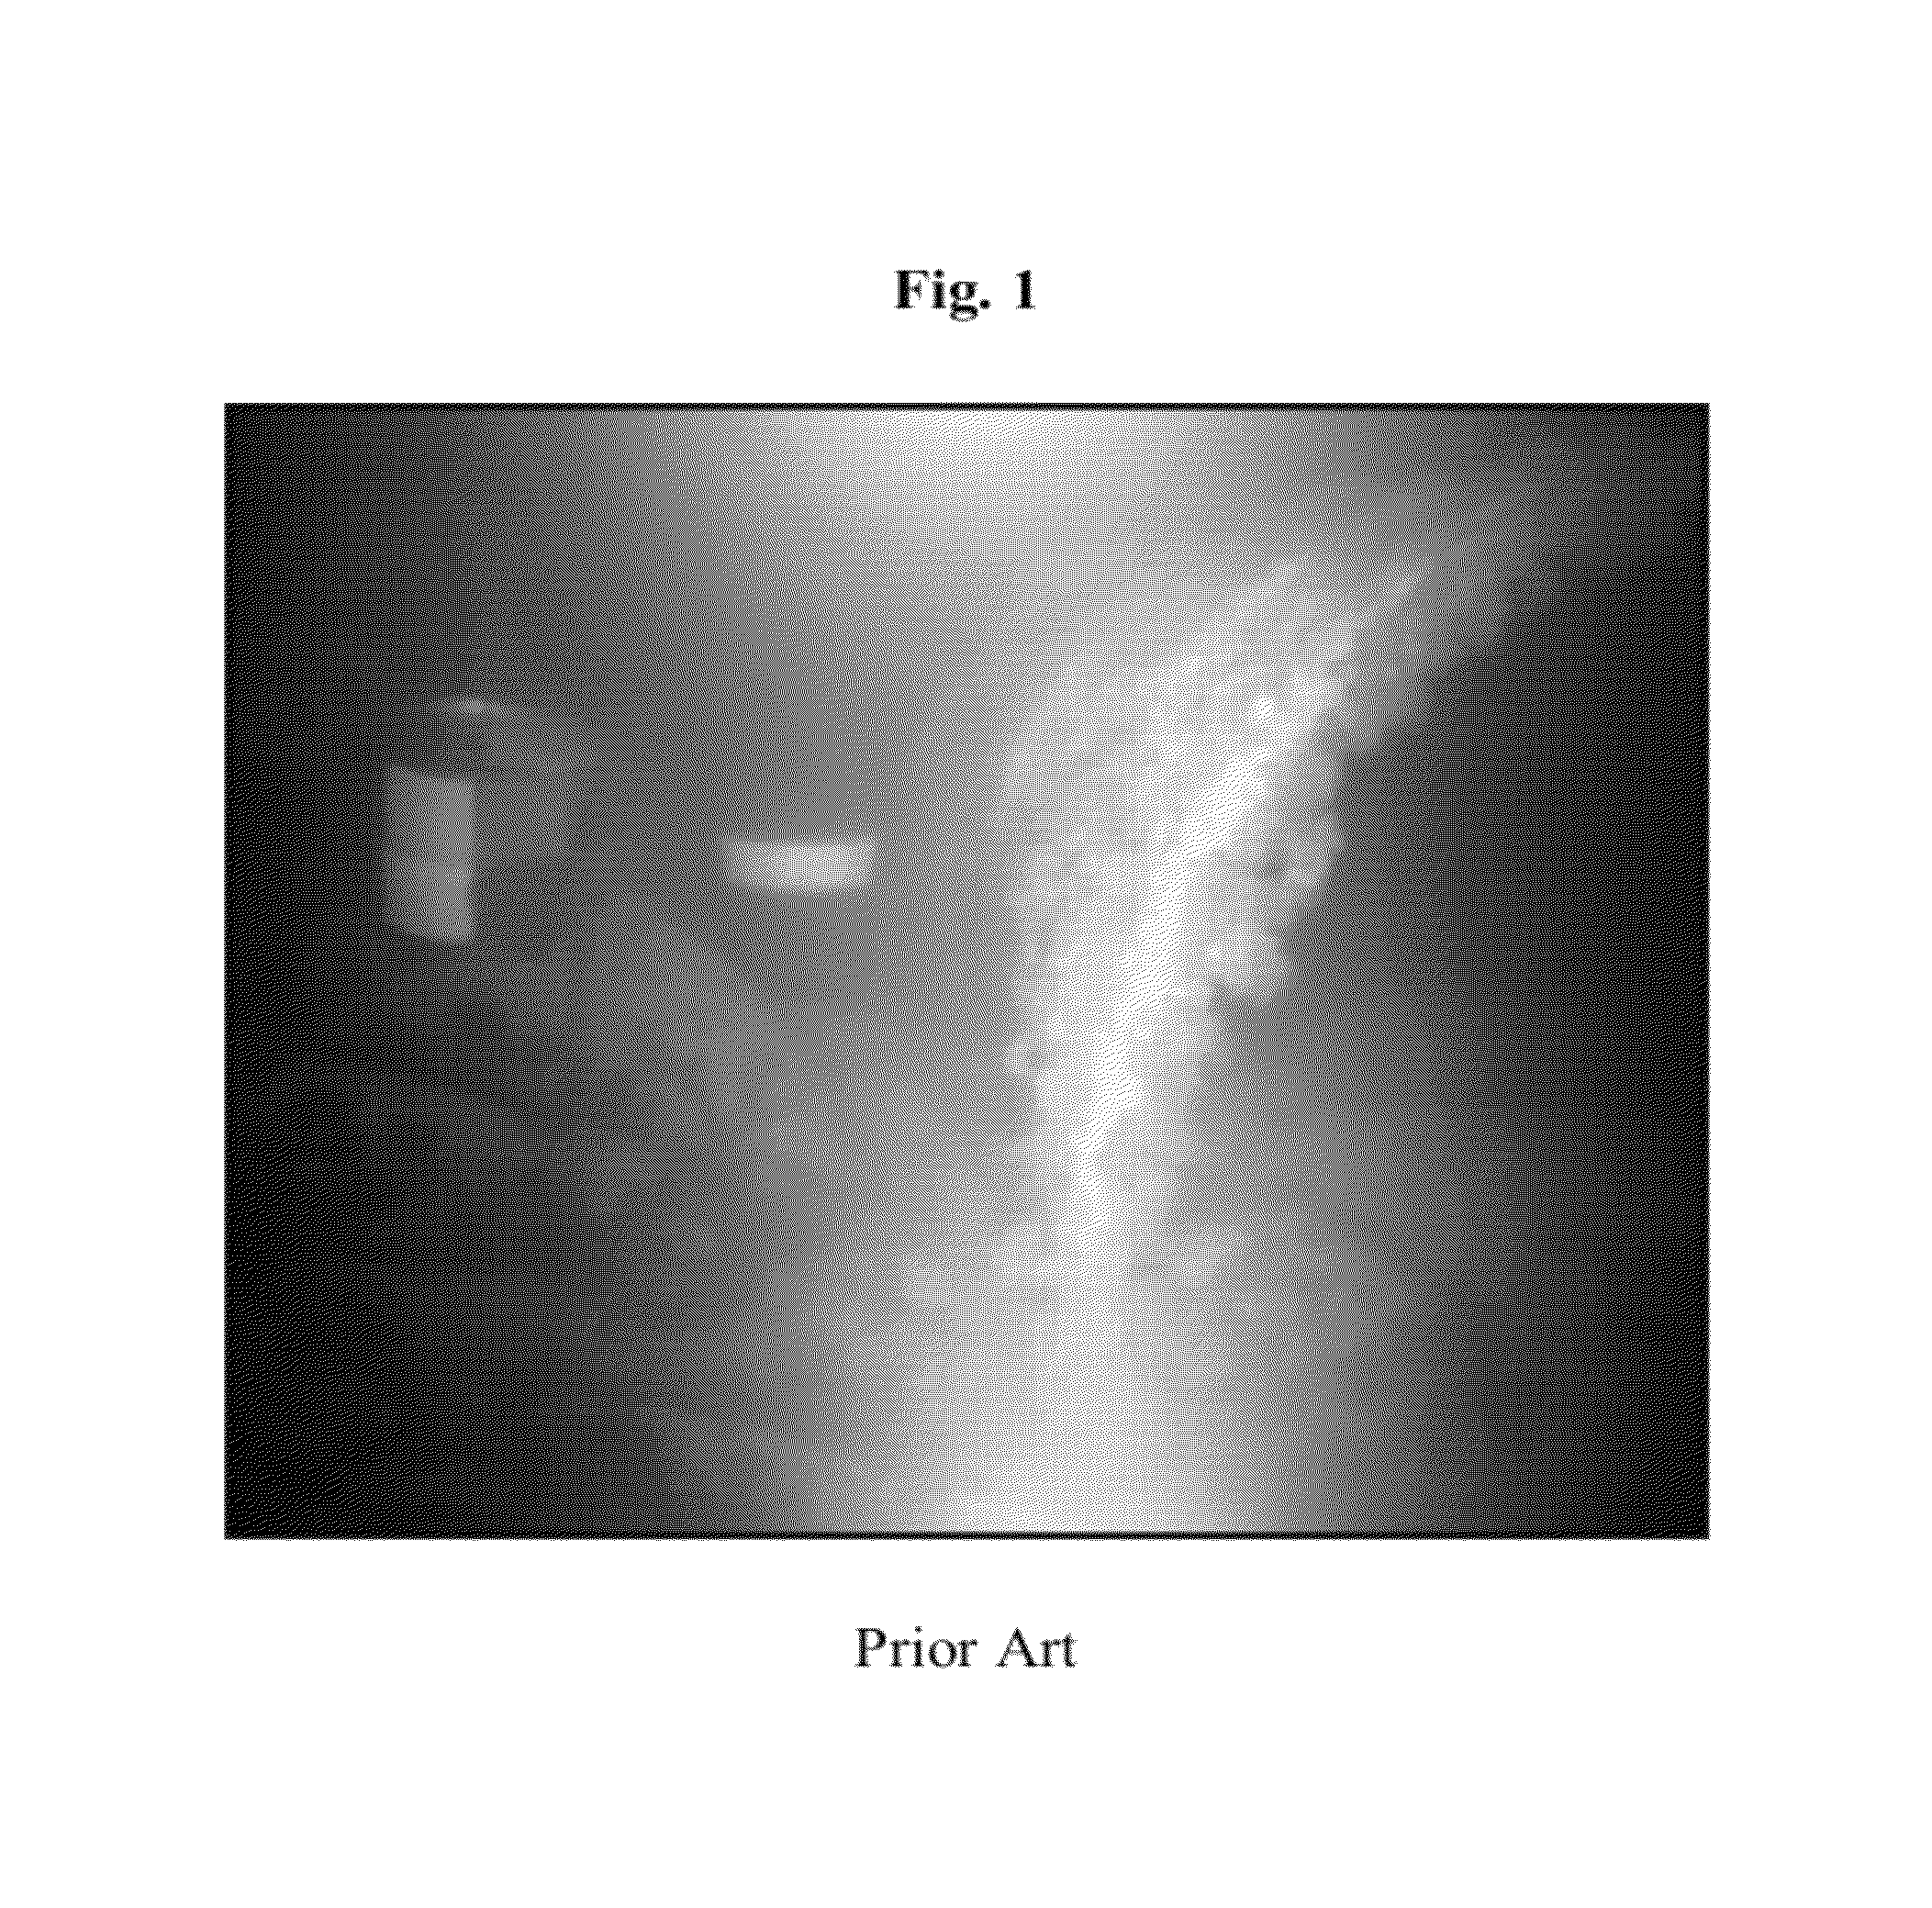 Imaging systems and methods for recovering object visibility